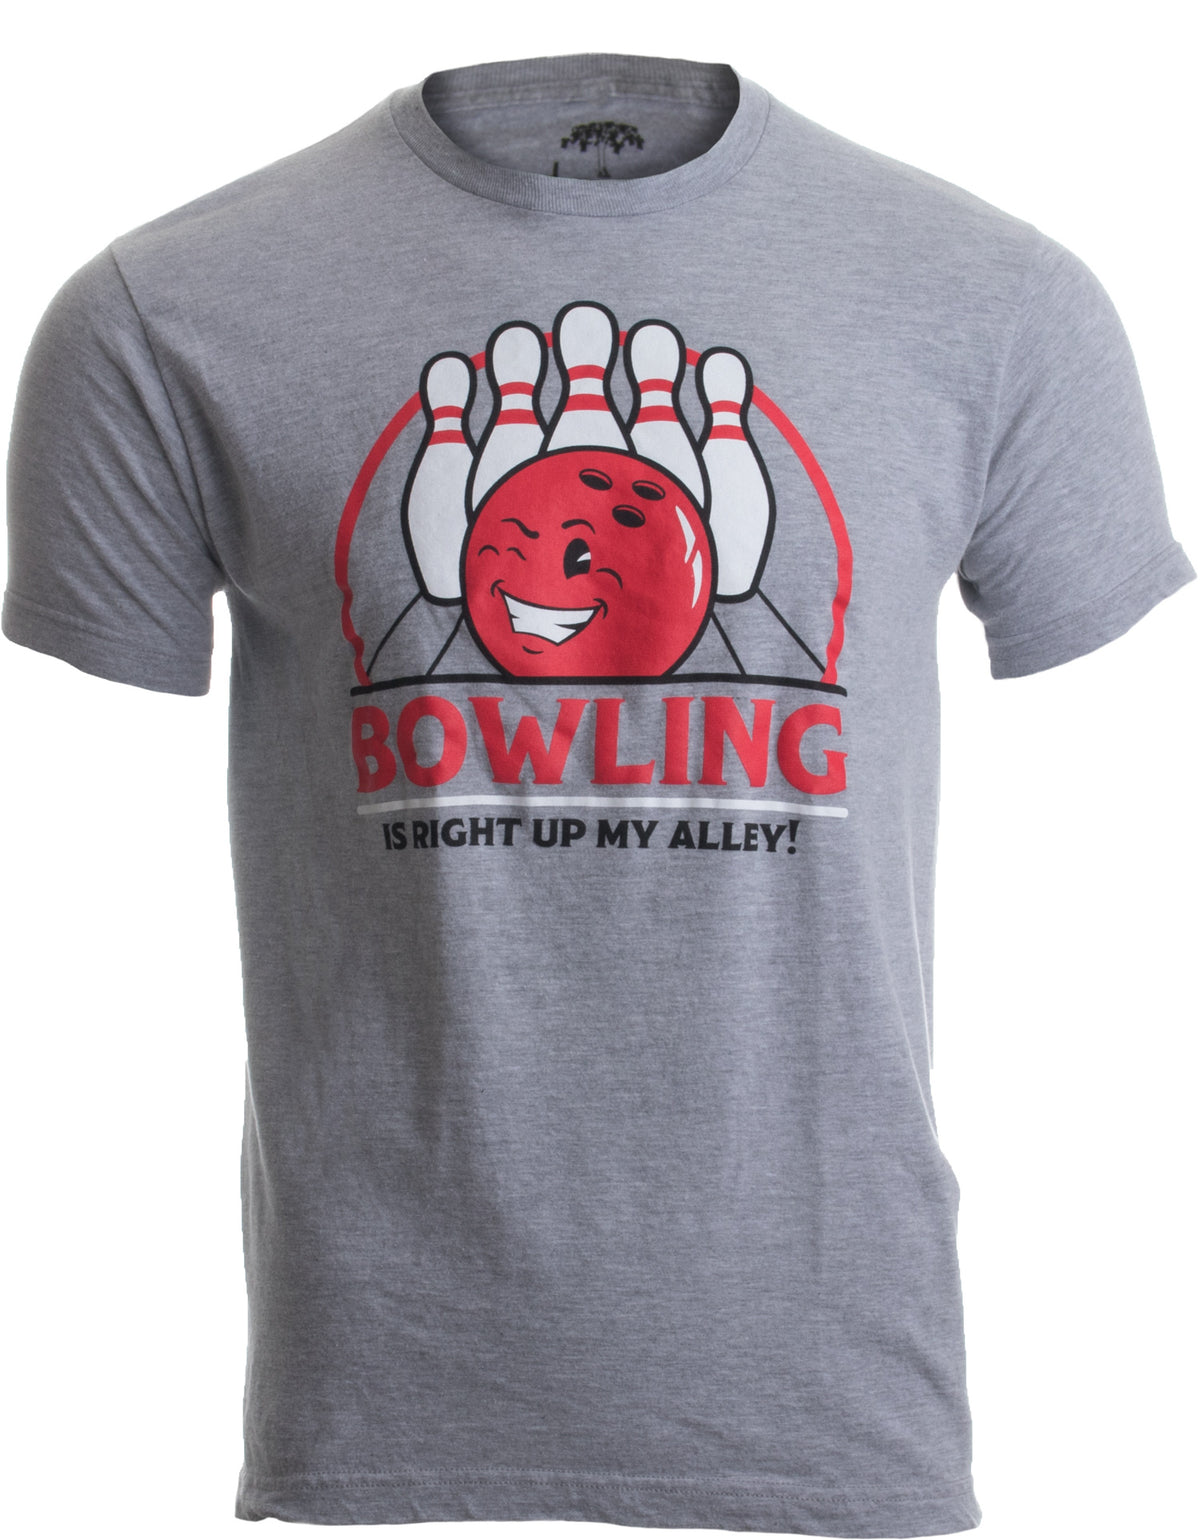 Bowling is Right up my Alley! | Funny Bowler, Bowling Team Pun Humor T-shirt